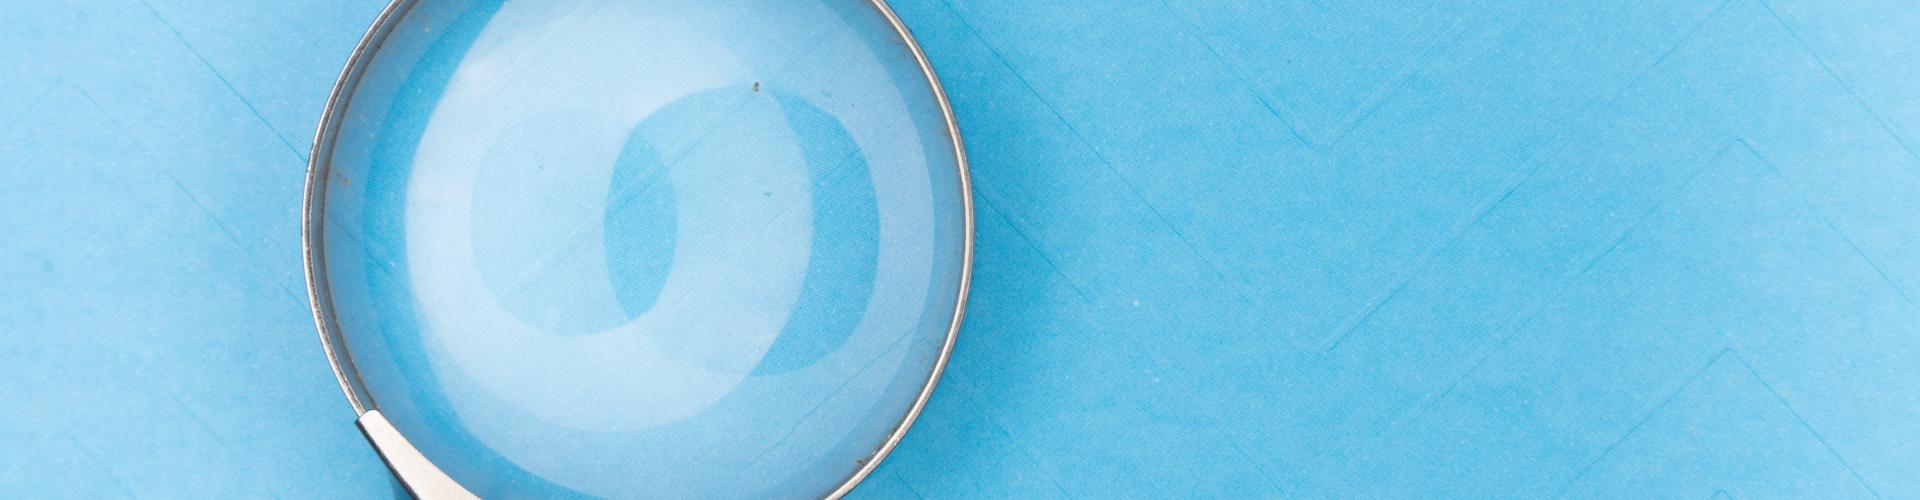 Magnifying glass against a blue background